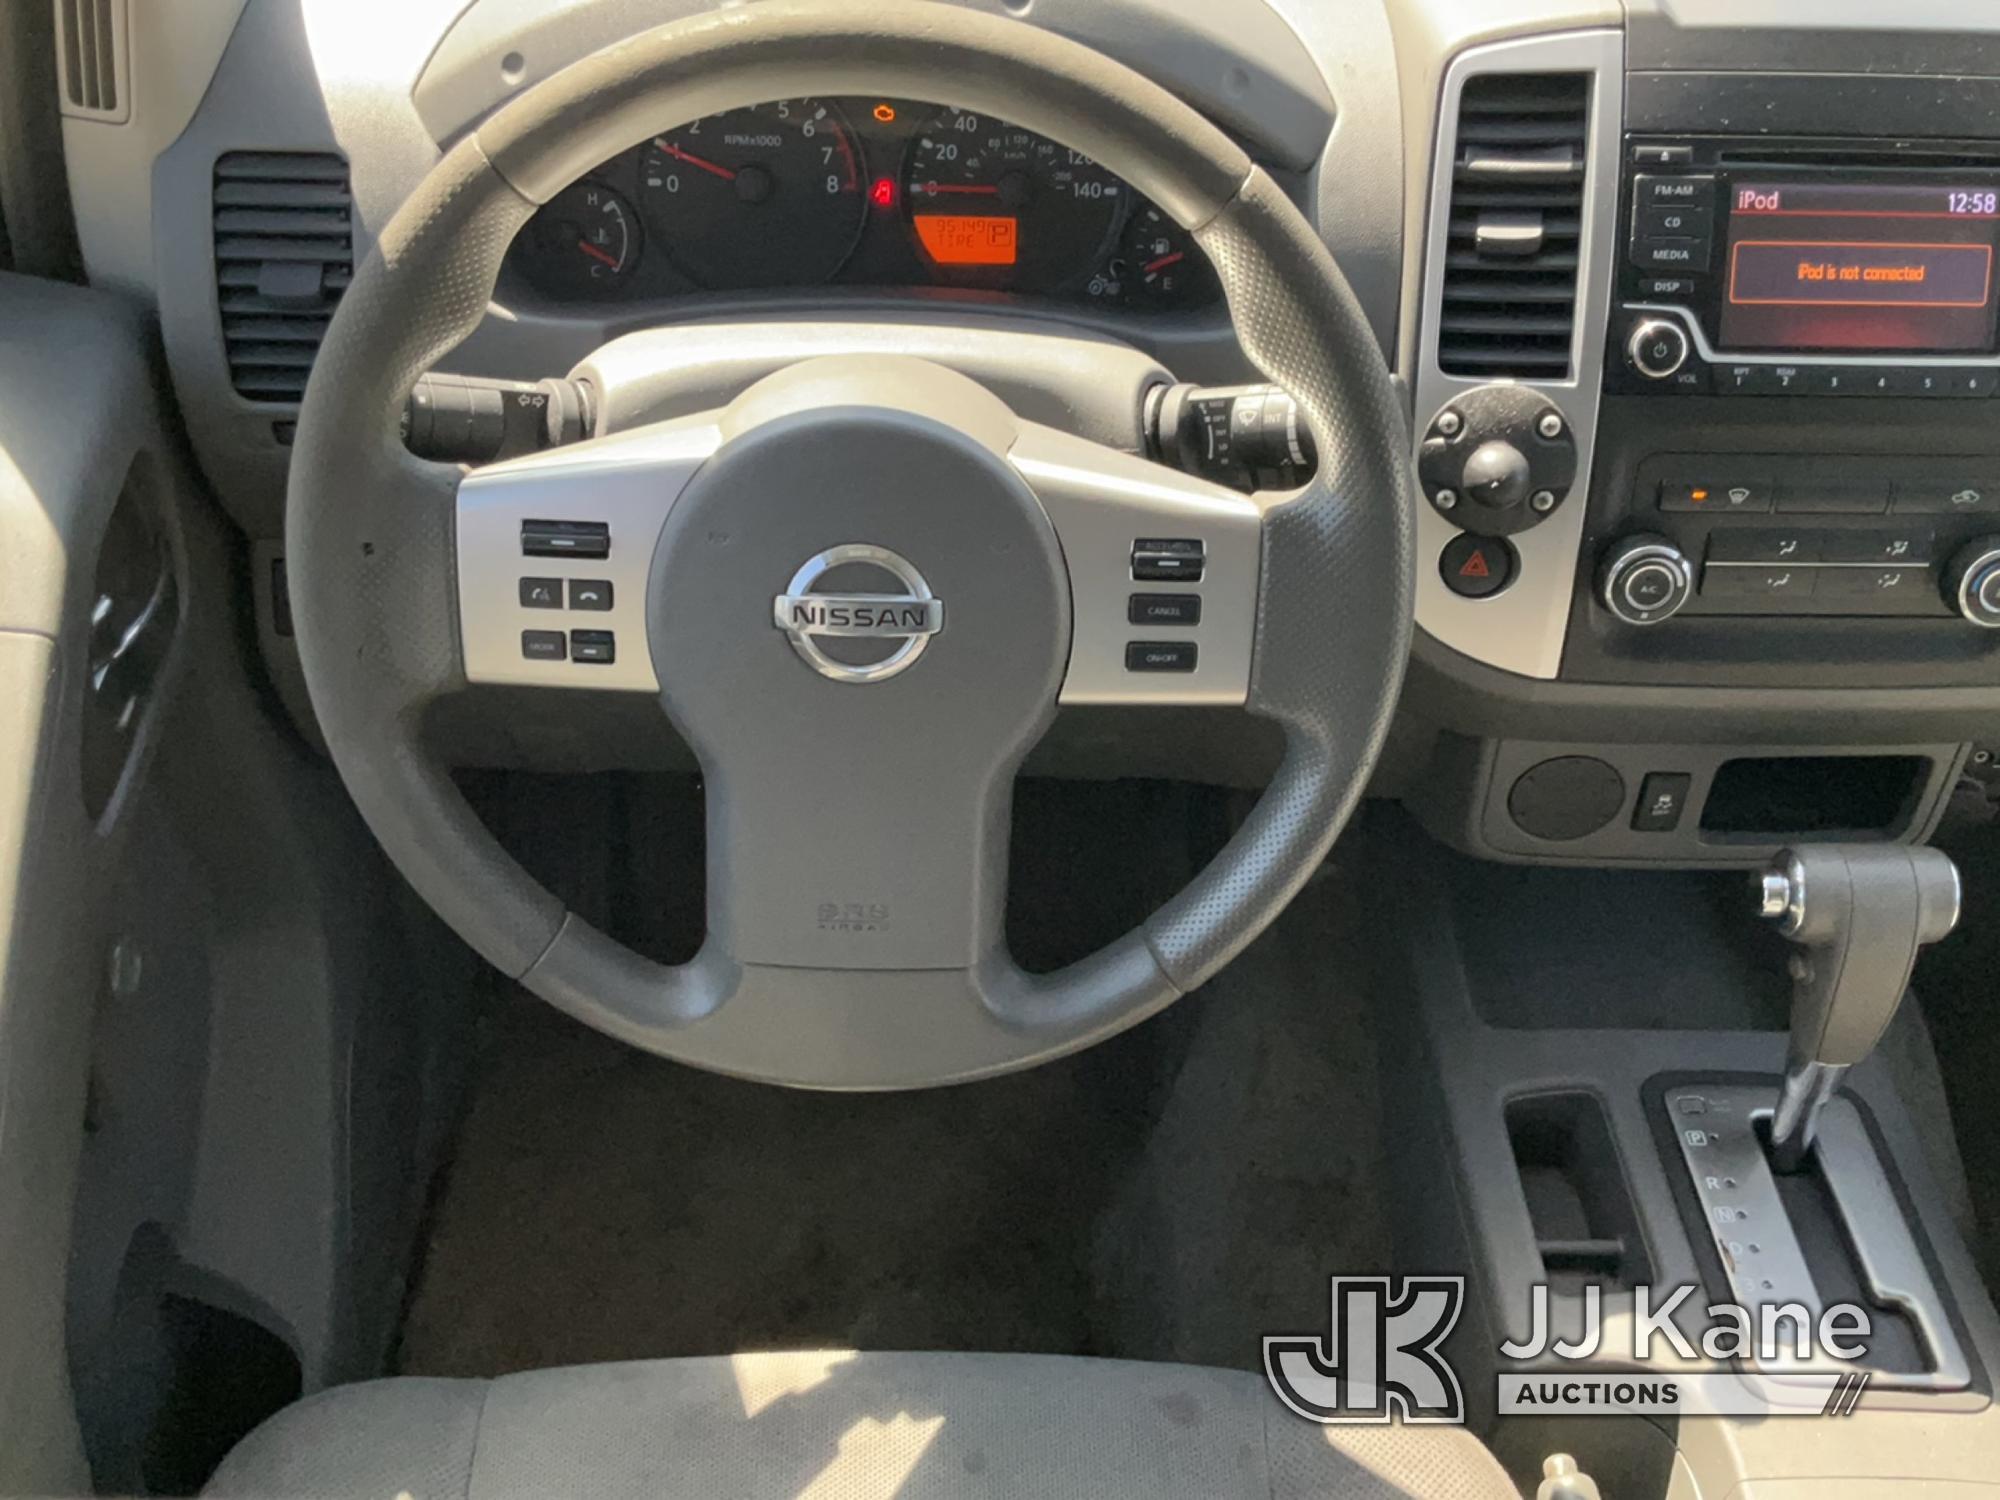 (South Beloit, IL) 2017 Nissan Frontier Extended-Cab Pickup Truck Runs & Moves) (Check Engine Light